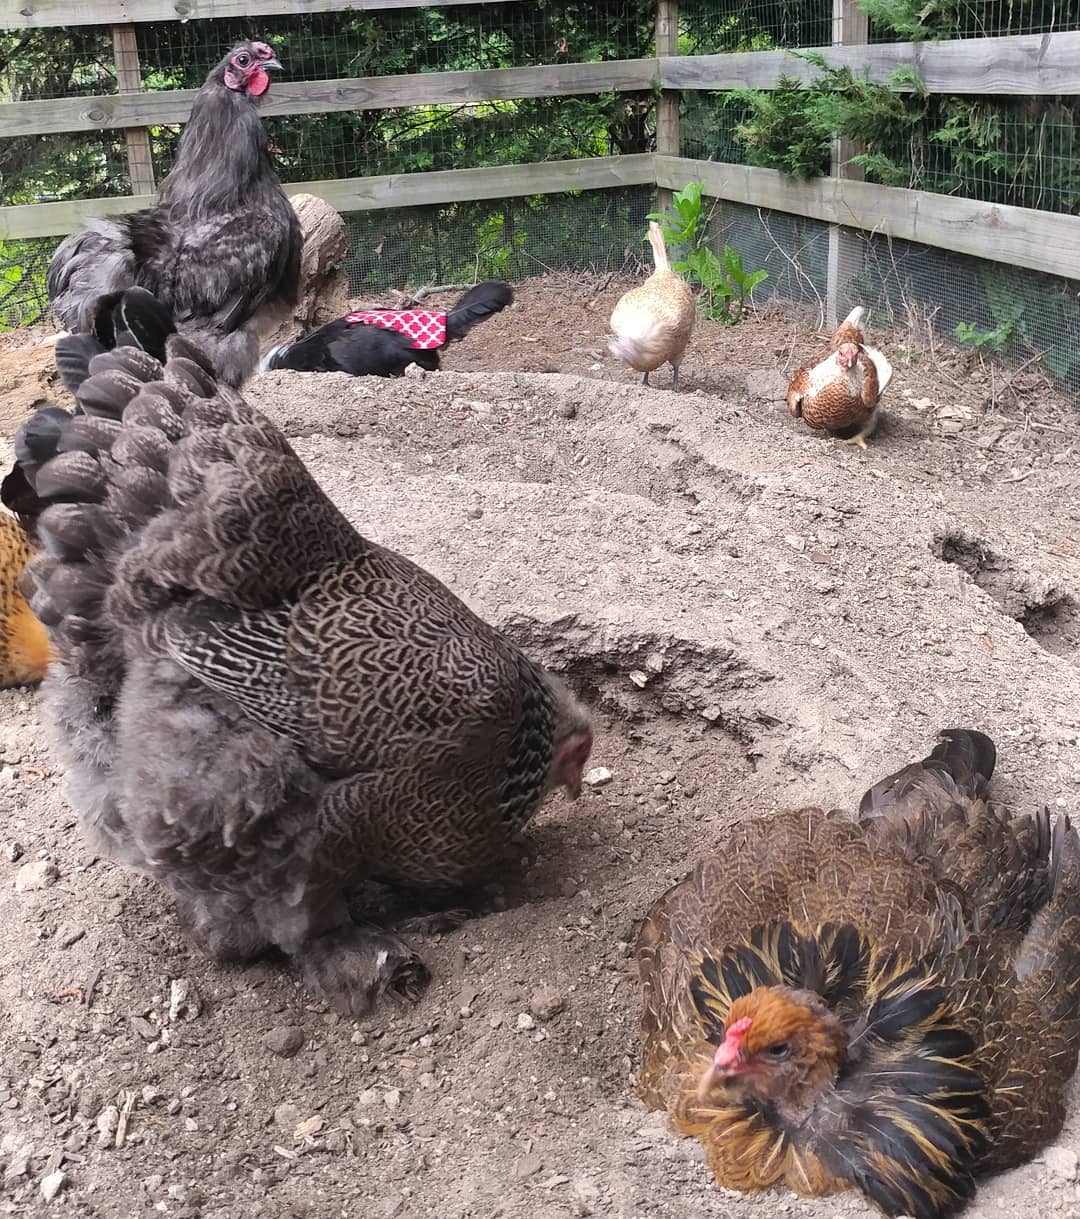 Sonia is keeping a close eye on the crew as they dust bathe. Very serious business on the dirt mound today. There has been quite a bit of dust bath thievery. Must patrol.